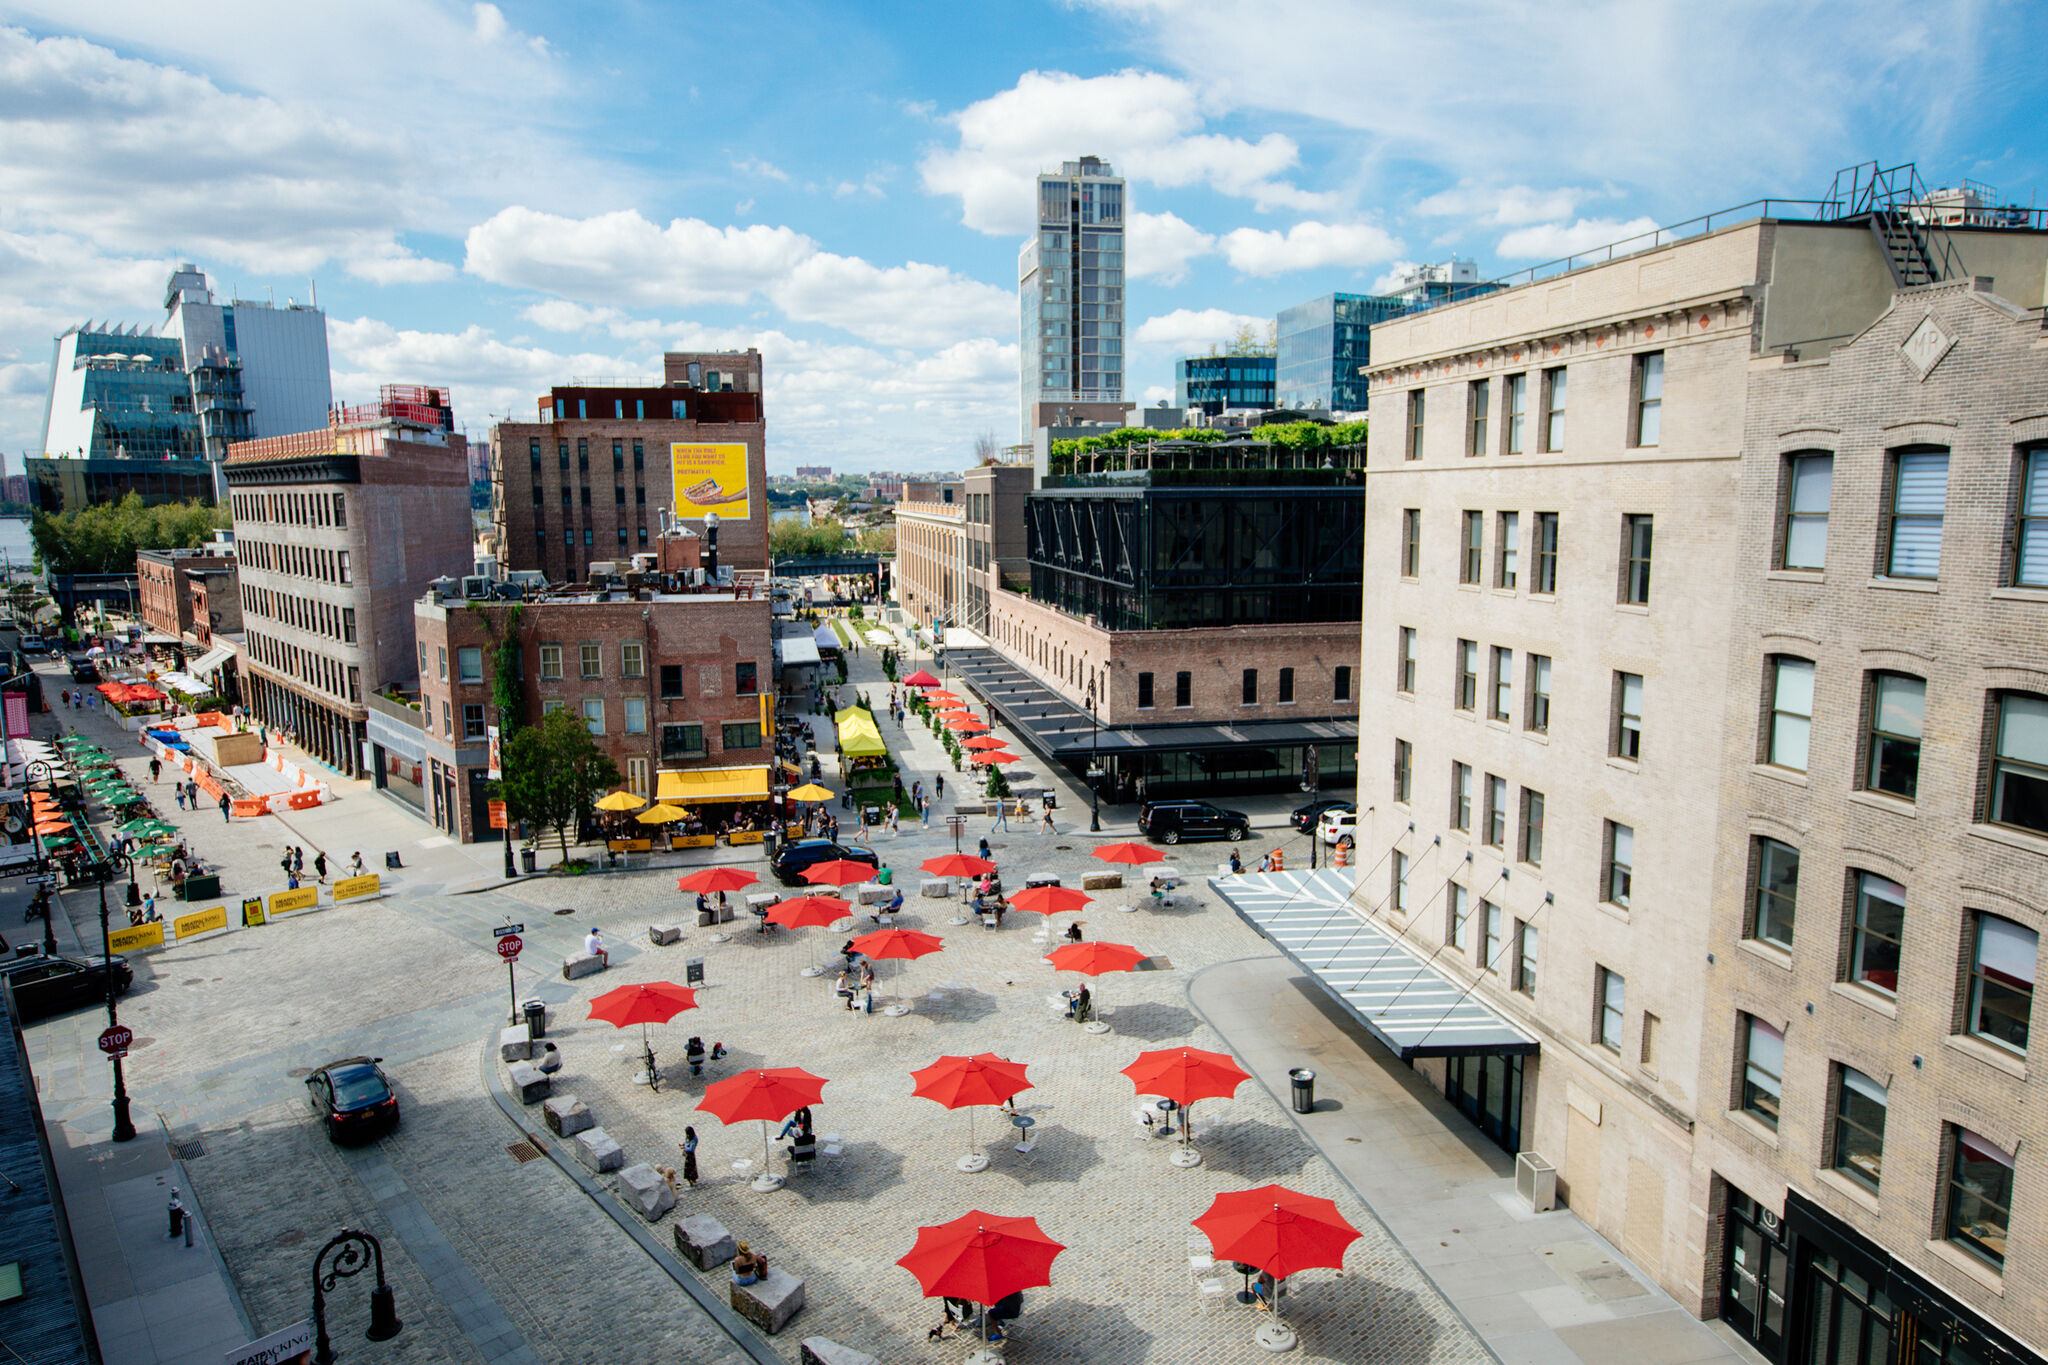 A series of buildings surround the open Gansevoort Plaza, which features a series of open-seating tables with red umbrellas.